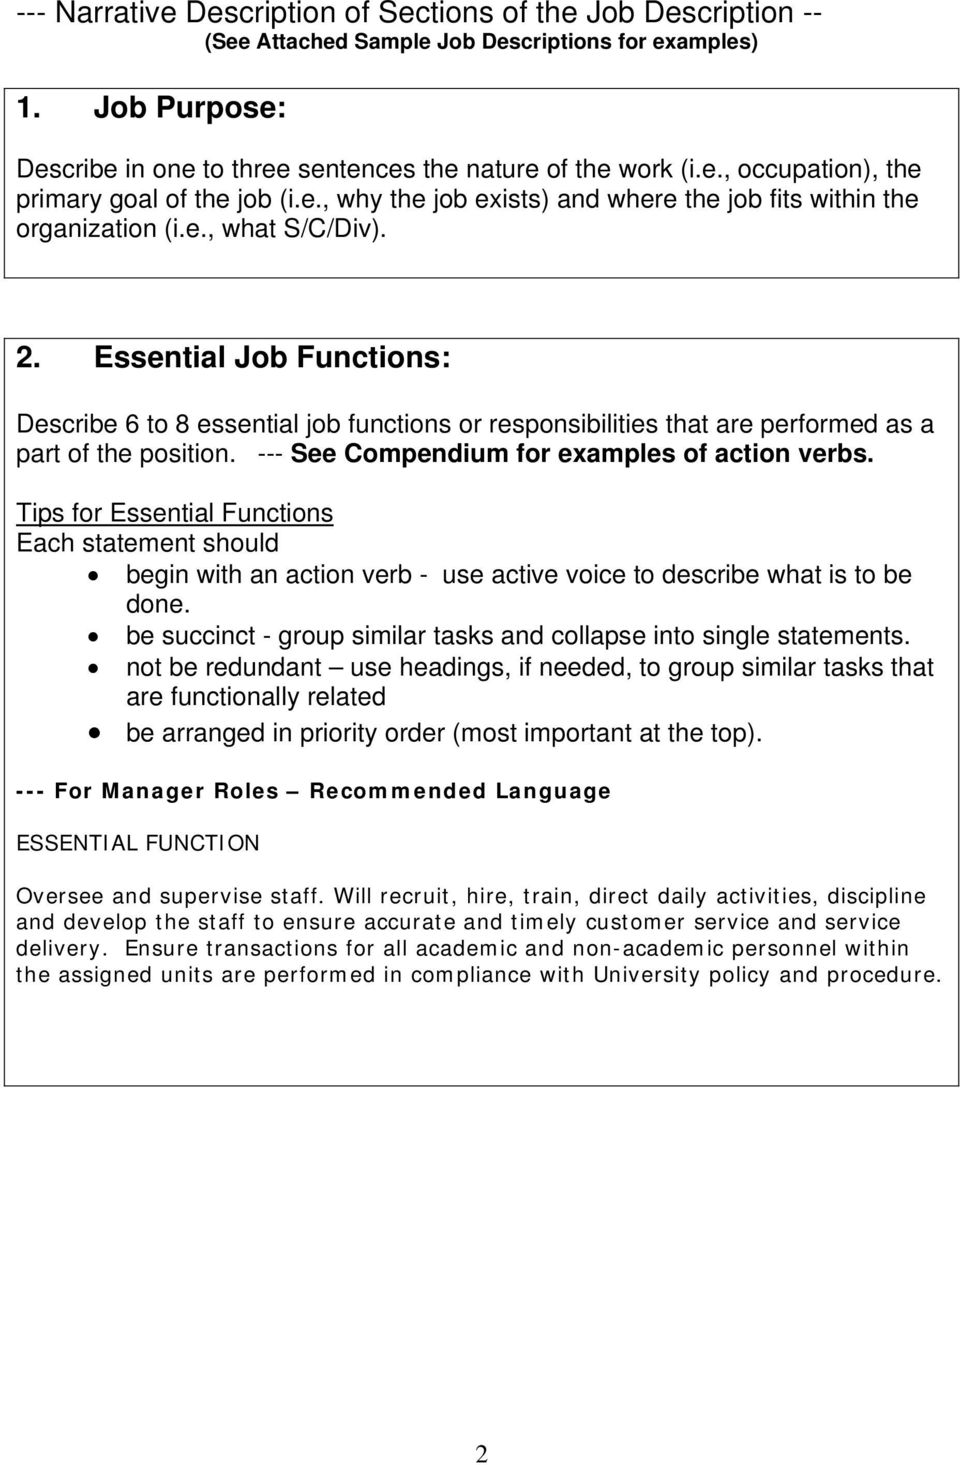 Essential Job Functions: Describe 6 to 8 essential job functions or responsibilities that are performed as a part of the position. --- See Compendium for examples of action verbs.